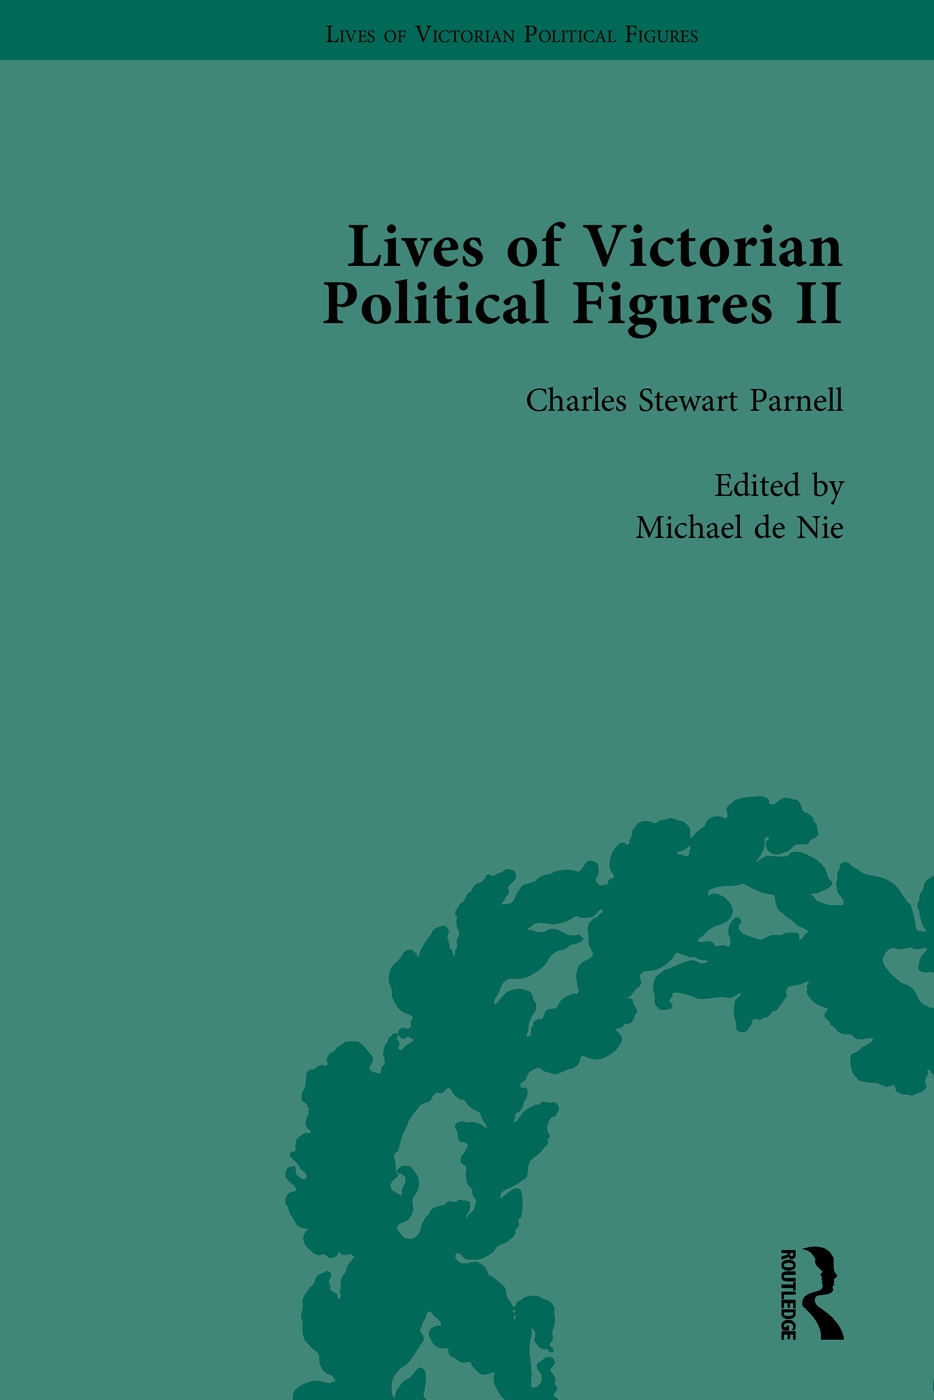 Lives of Victorian Political Figures, Part II: Daniel O’Connell, James Bronterre O’Brien, Charles Stewart Parnell and Michael Davitt by Their Contempo